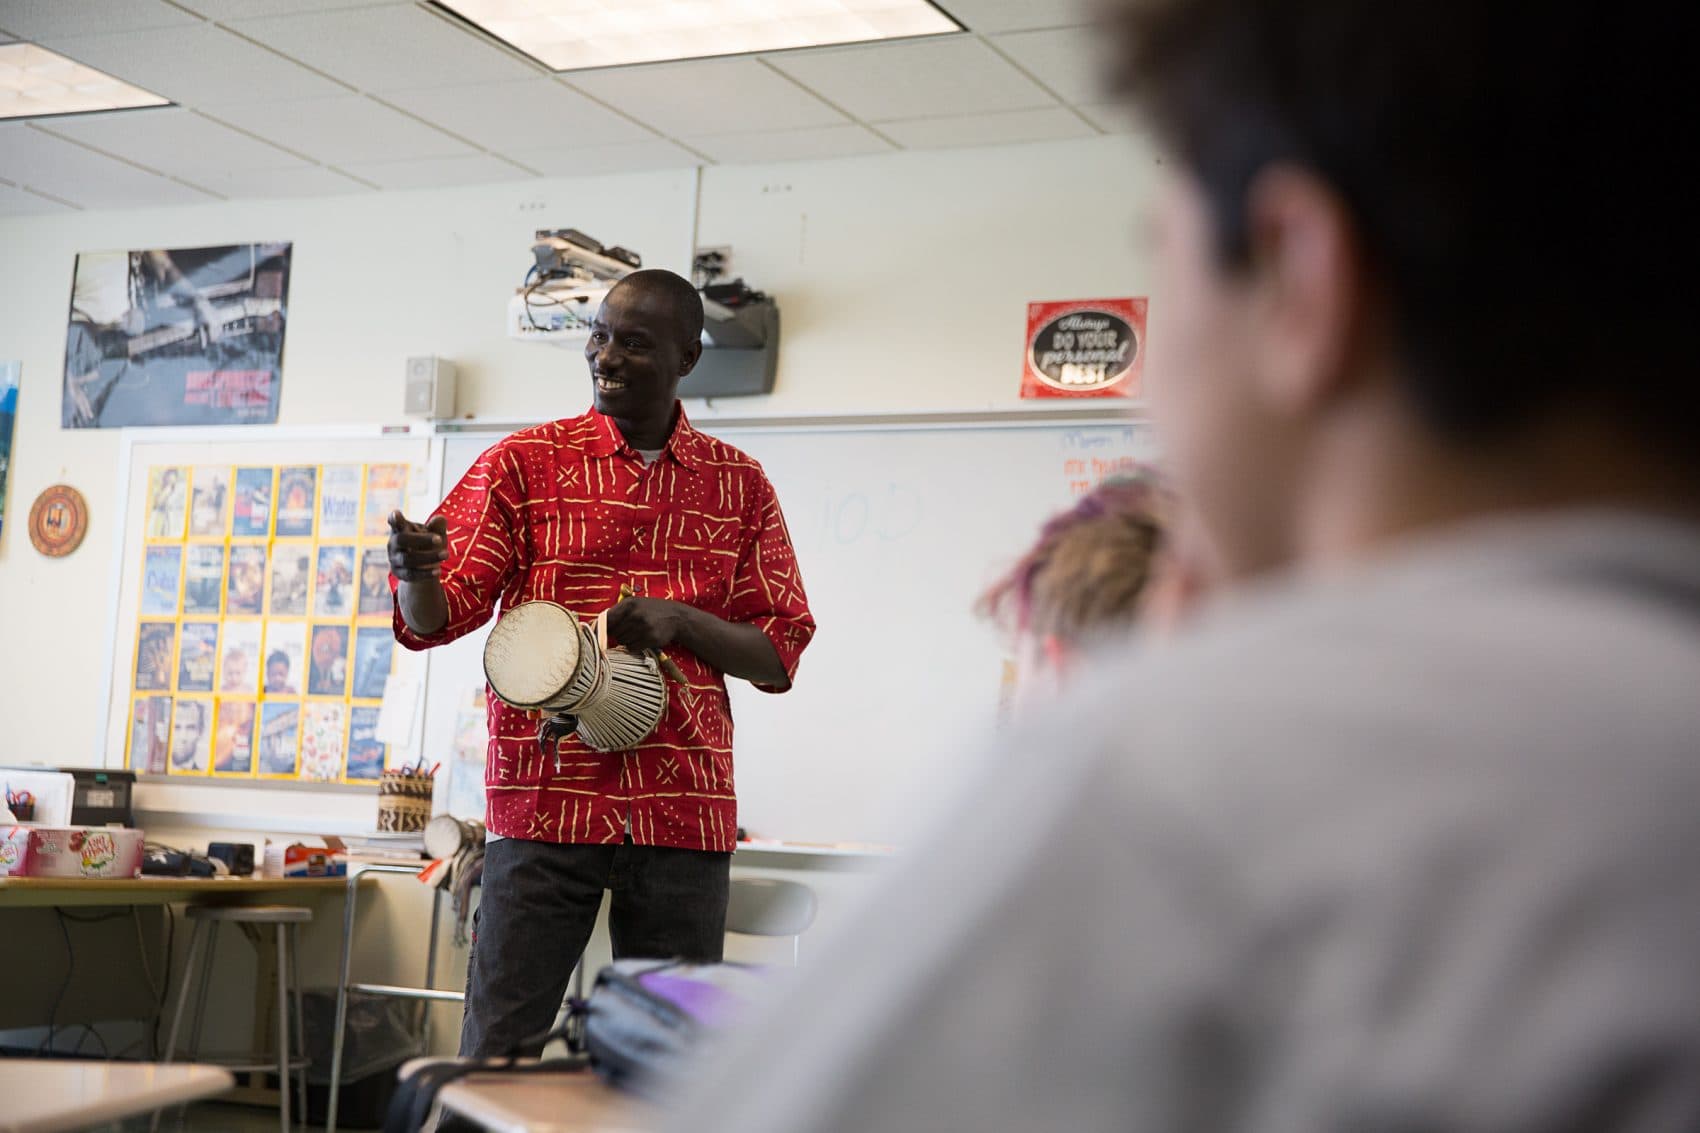 Holding one of his talking drums, Senegalese drum soloist Massamba Diop leads a classroom workshop at Roger Ludlowe Middle School in Fairfield, Connecticut on March 23, 2018. (Ryan Caron King/Connecticut Public Radio)